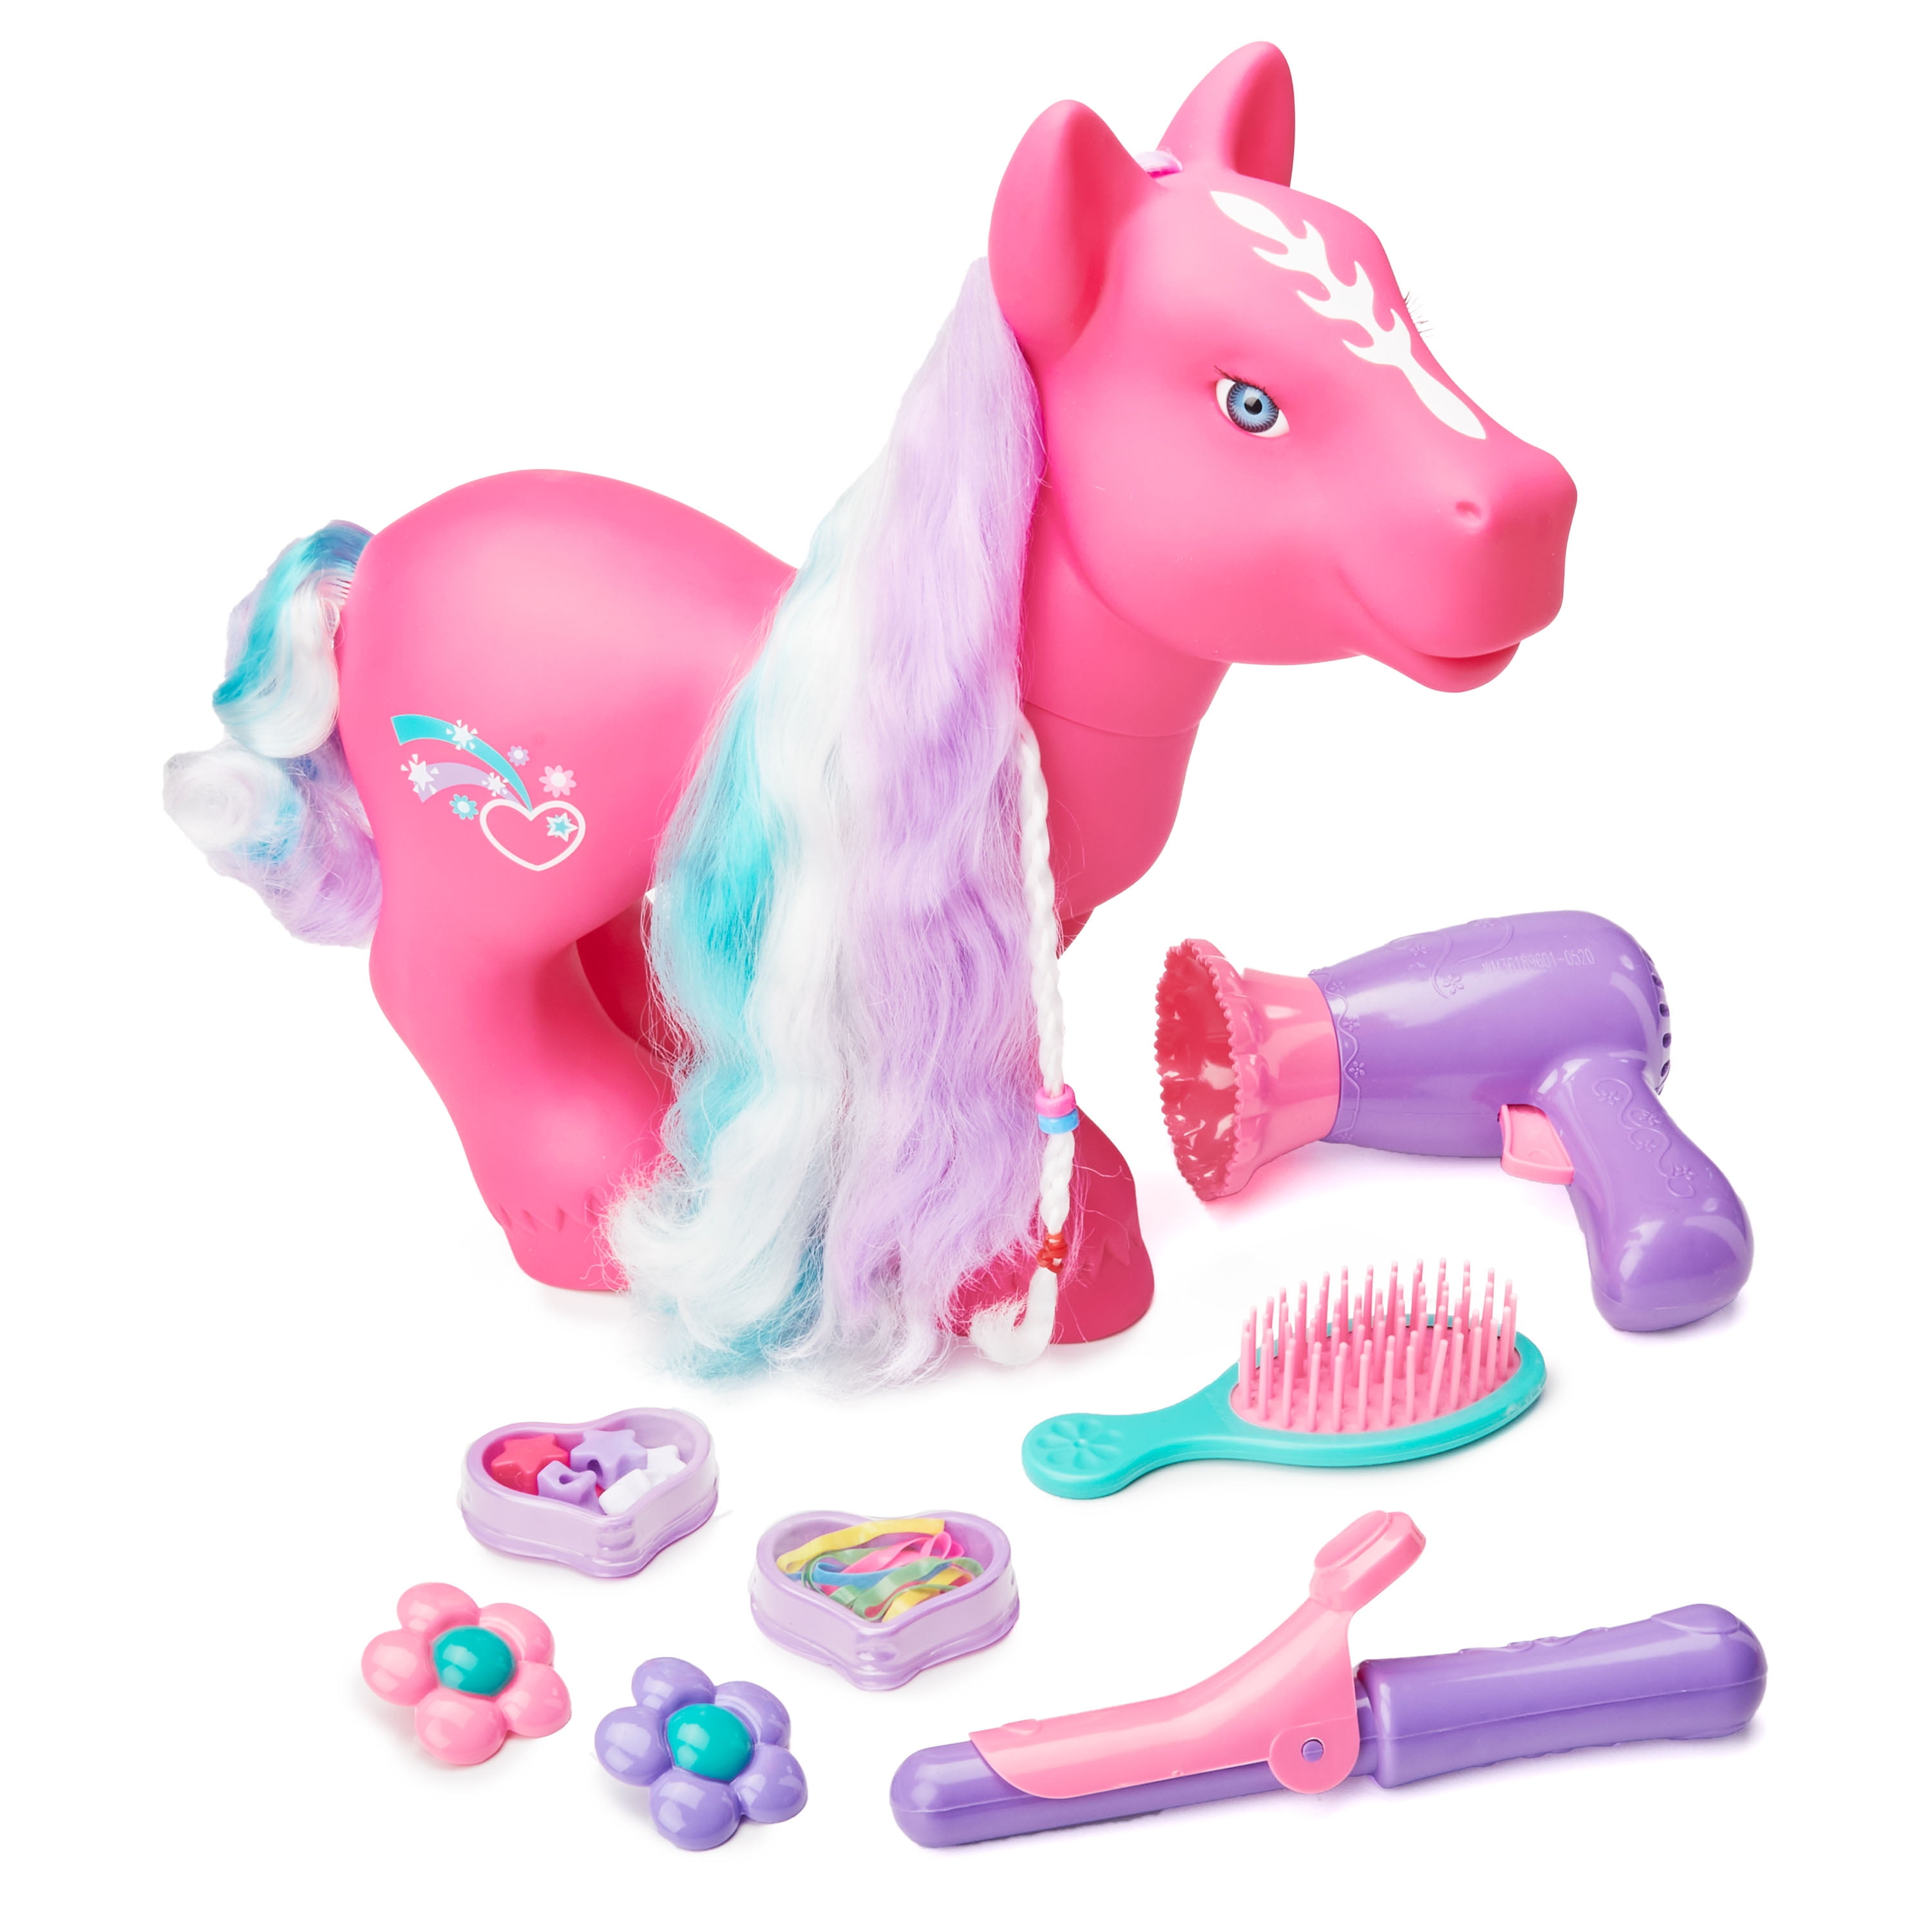 Details about   New Girls Pretend Play Pony Set Brush Ponies Little Toys Xmas Toys Random Color 